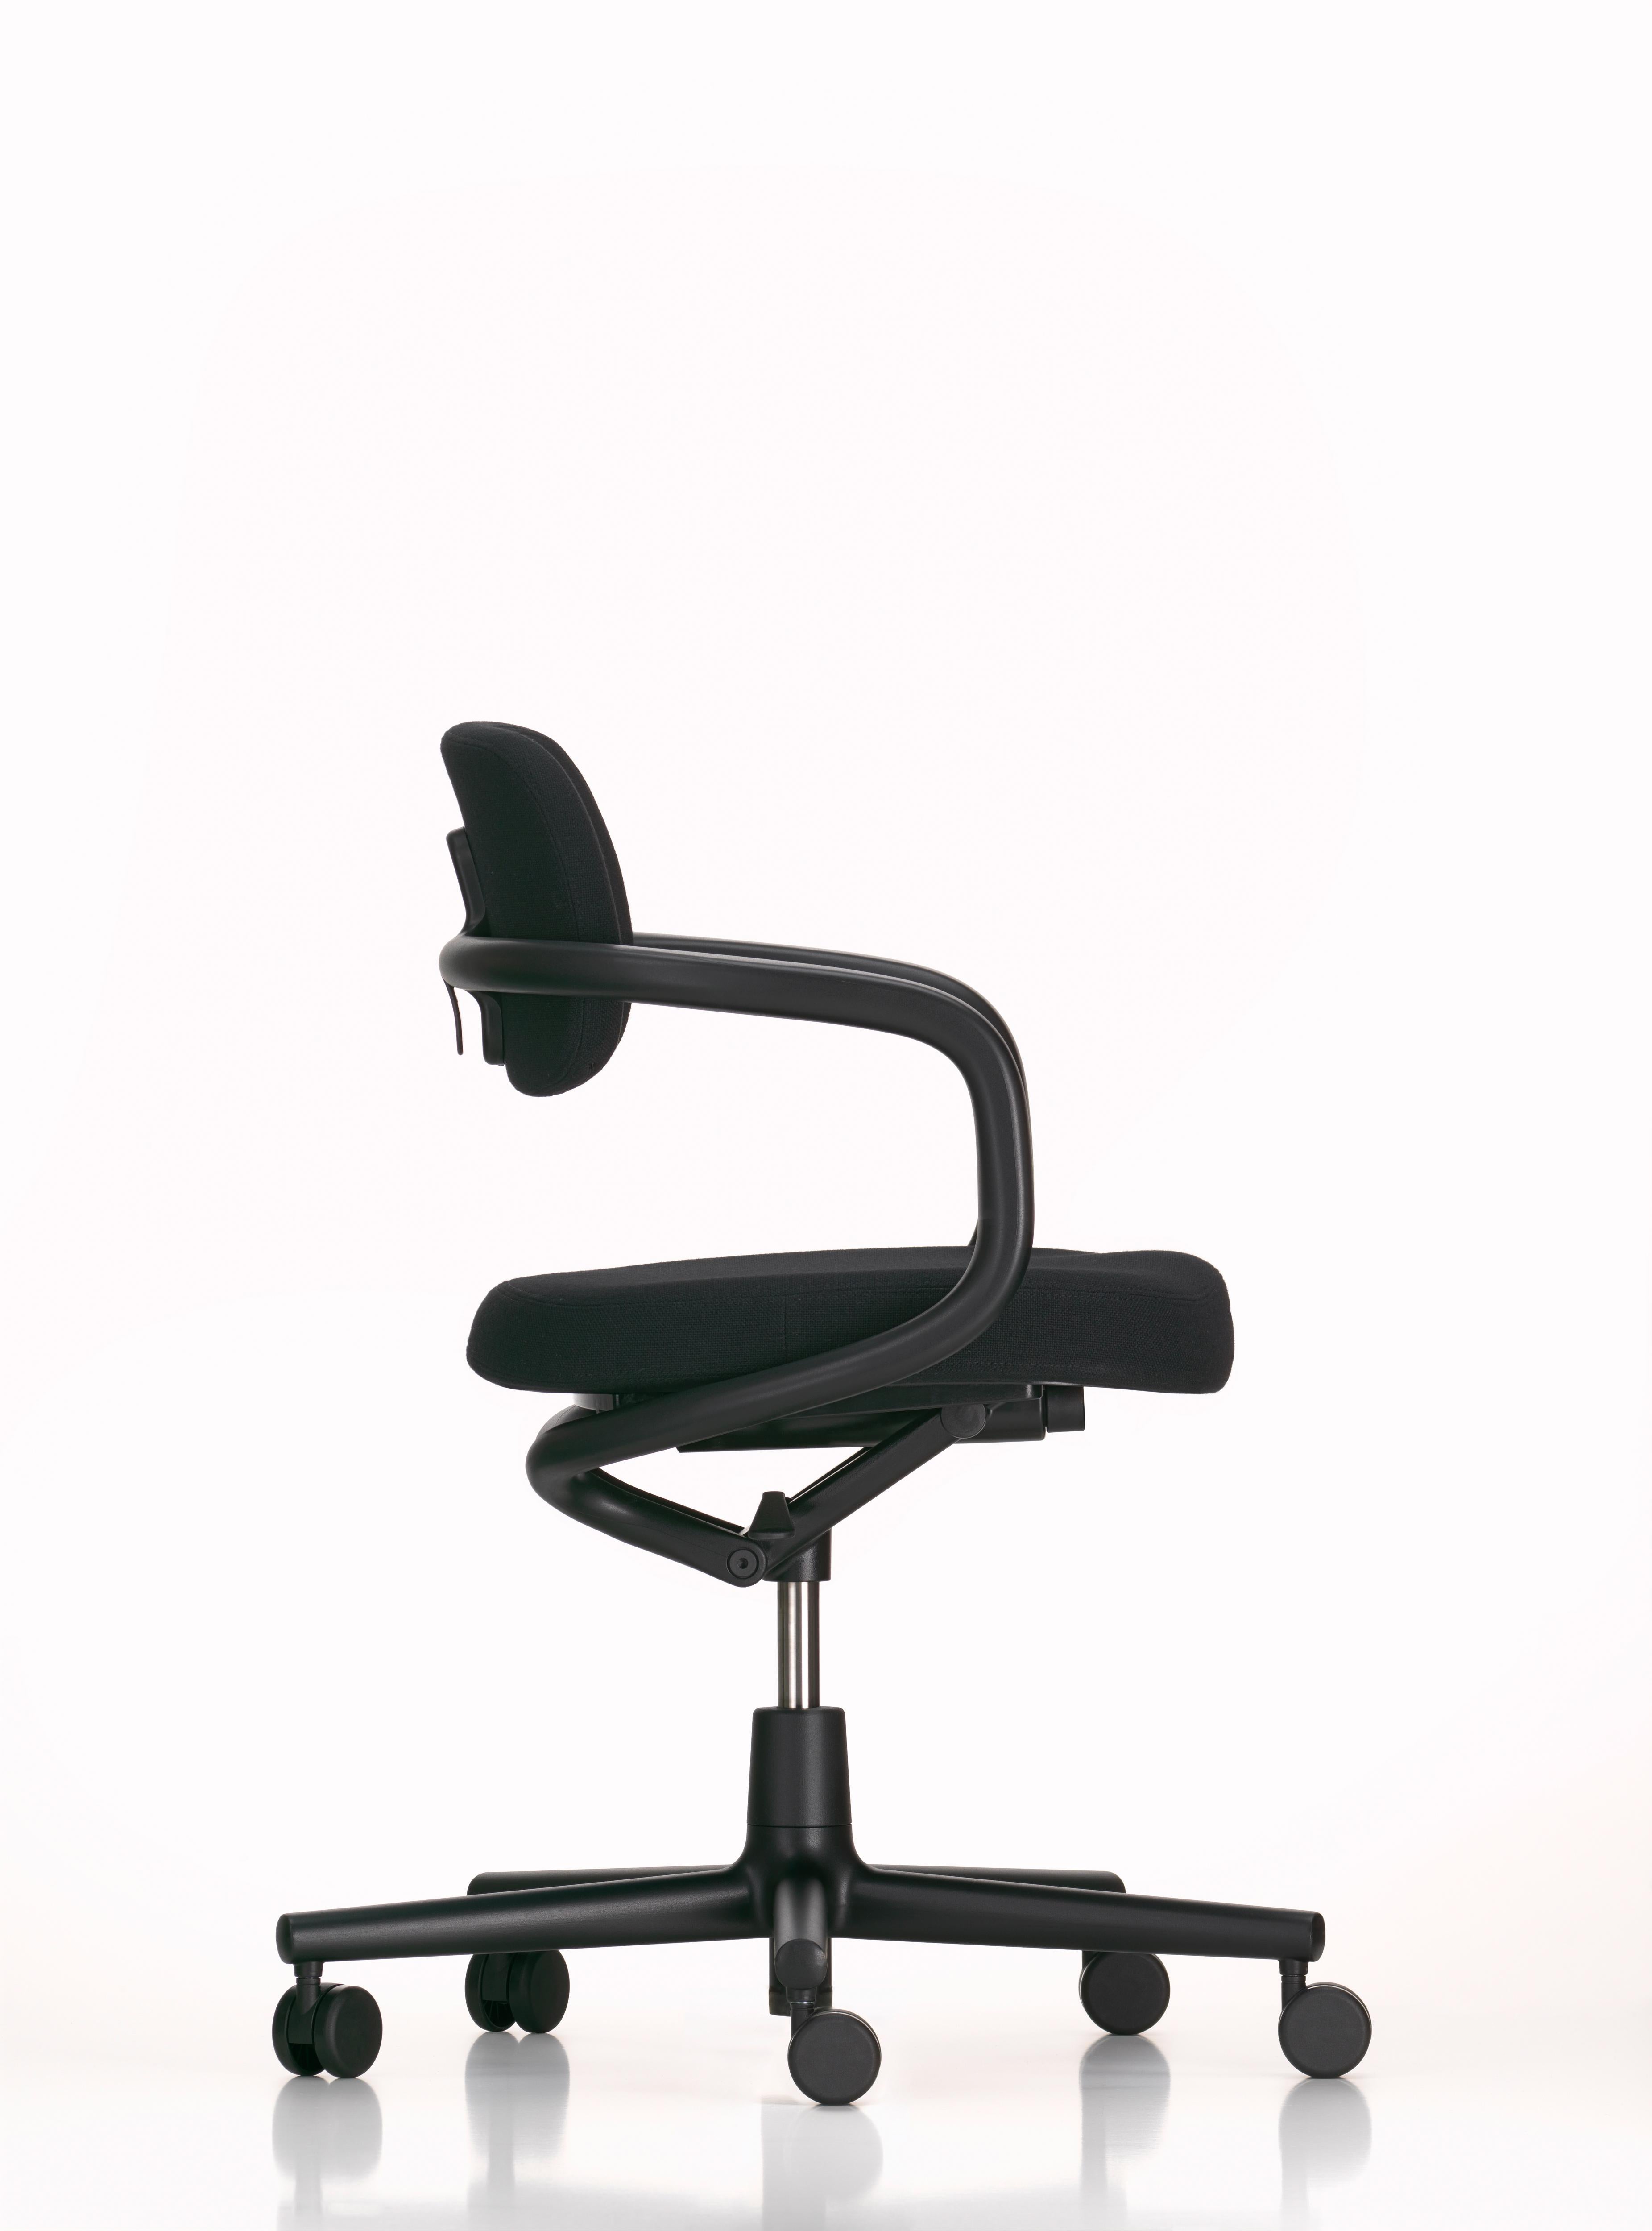 These items are only available in the United States.

The Allstar chair defines conventional categorizations: is it a chair for office workplaces or the home office? What period is it from? Does it fulfill specific functions? What is it made of? In